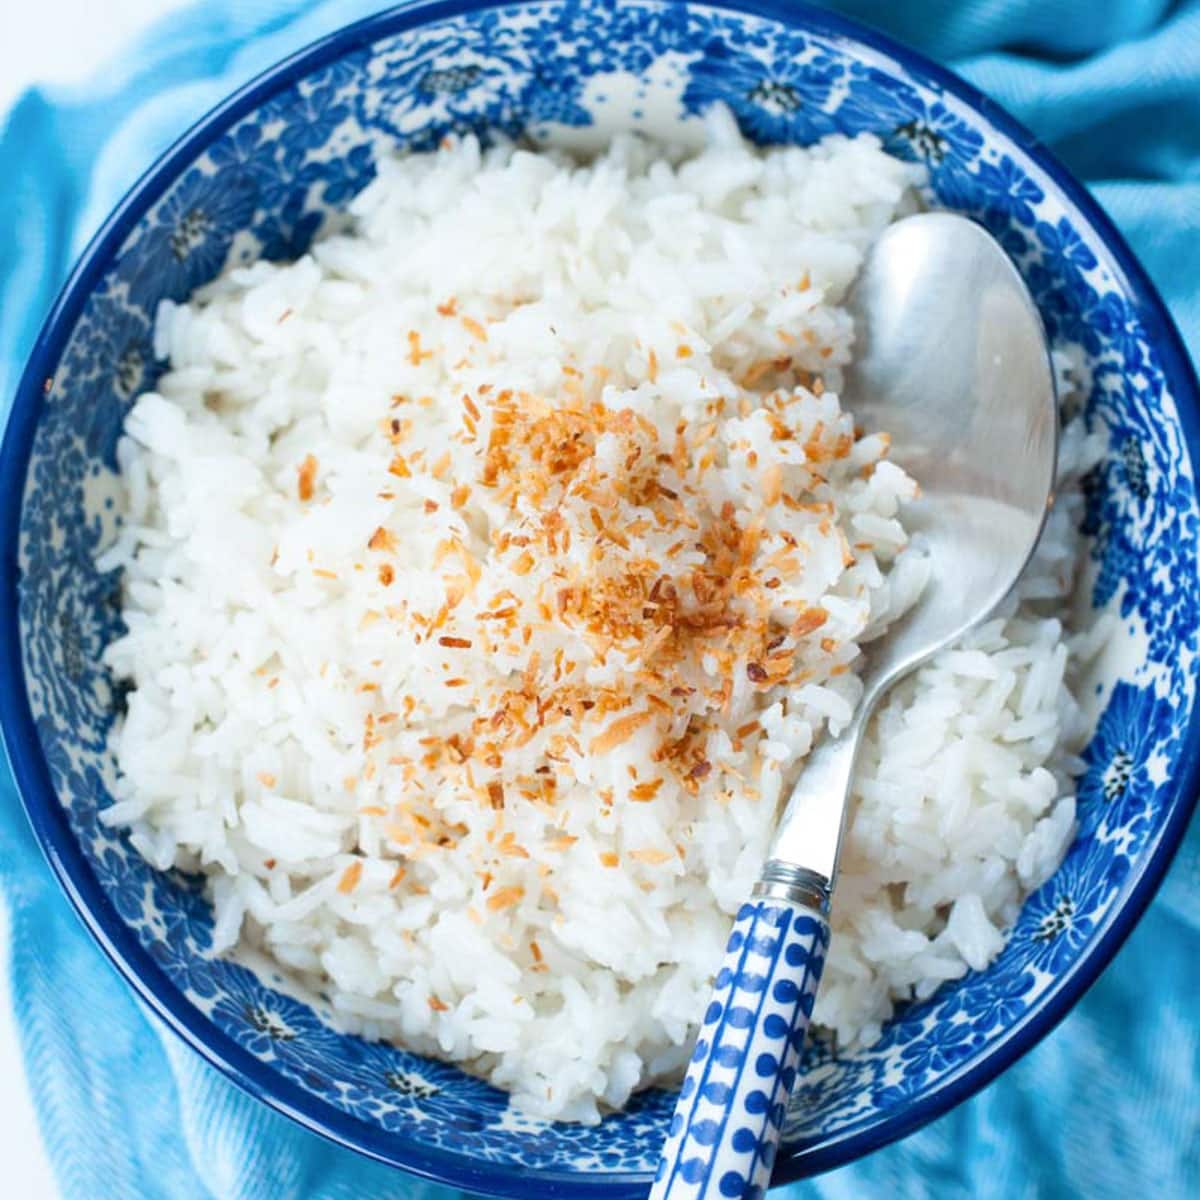 Coconut rice in a blue bowl.